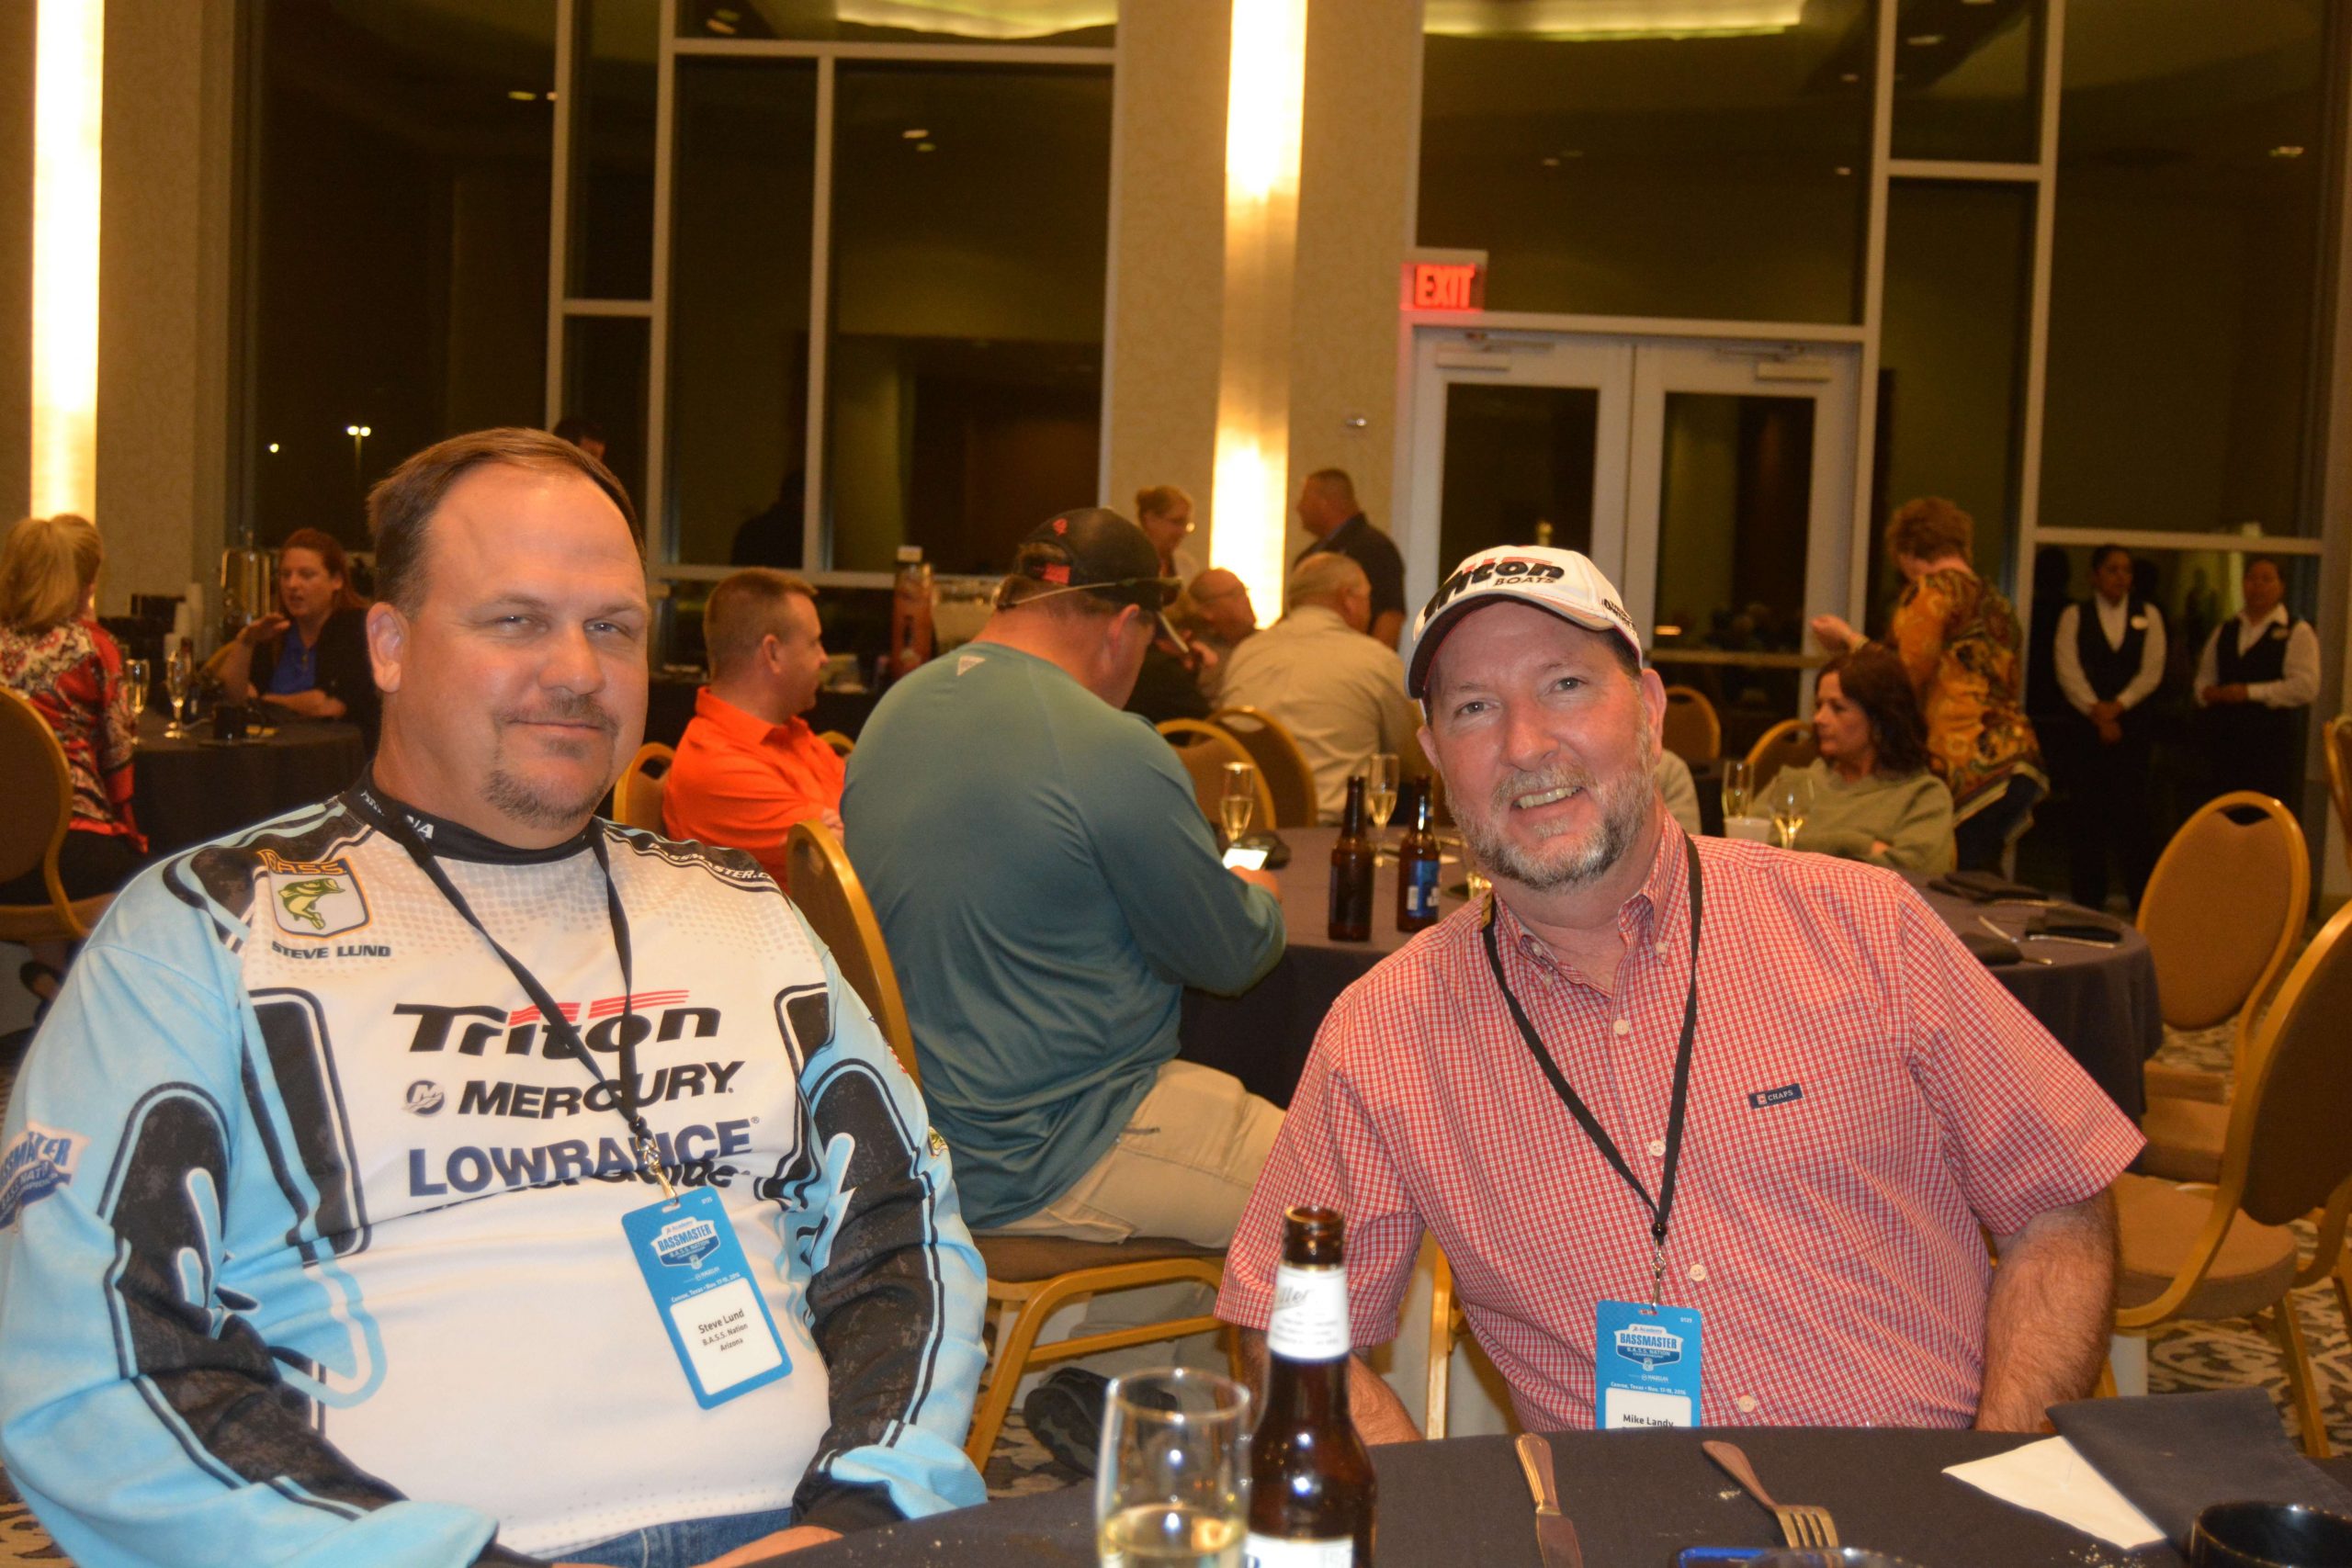 Steve Lund of Arizona, who qualified for the Classic last year, visits with his Western friend, Mike Landy of California.